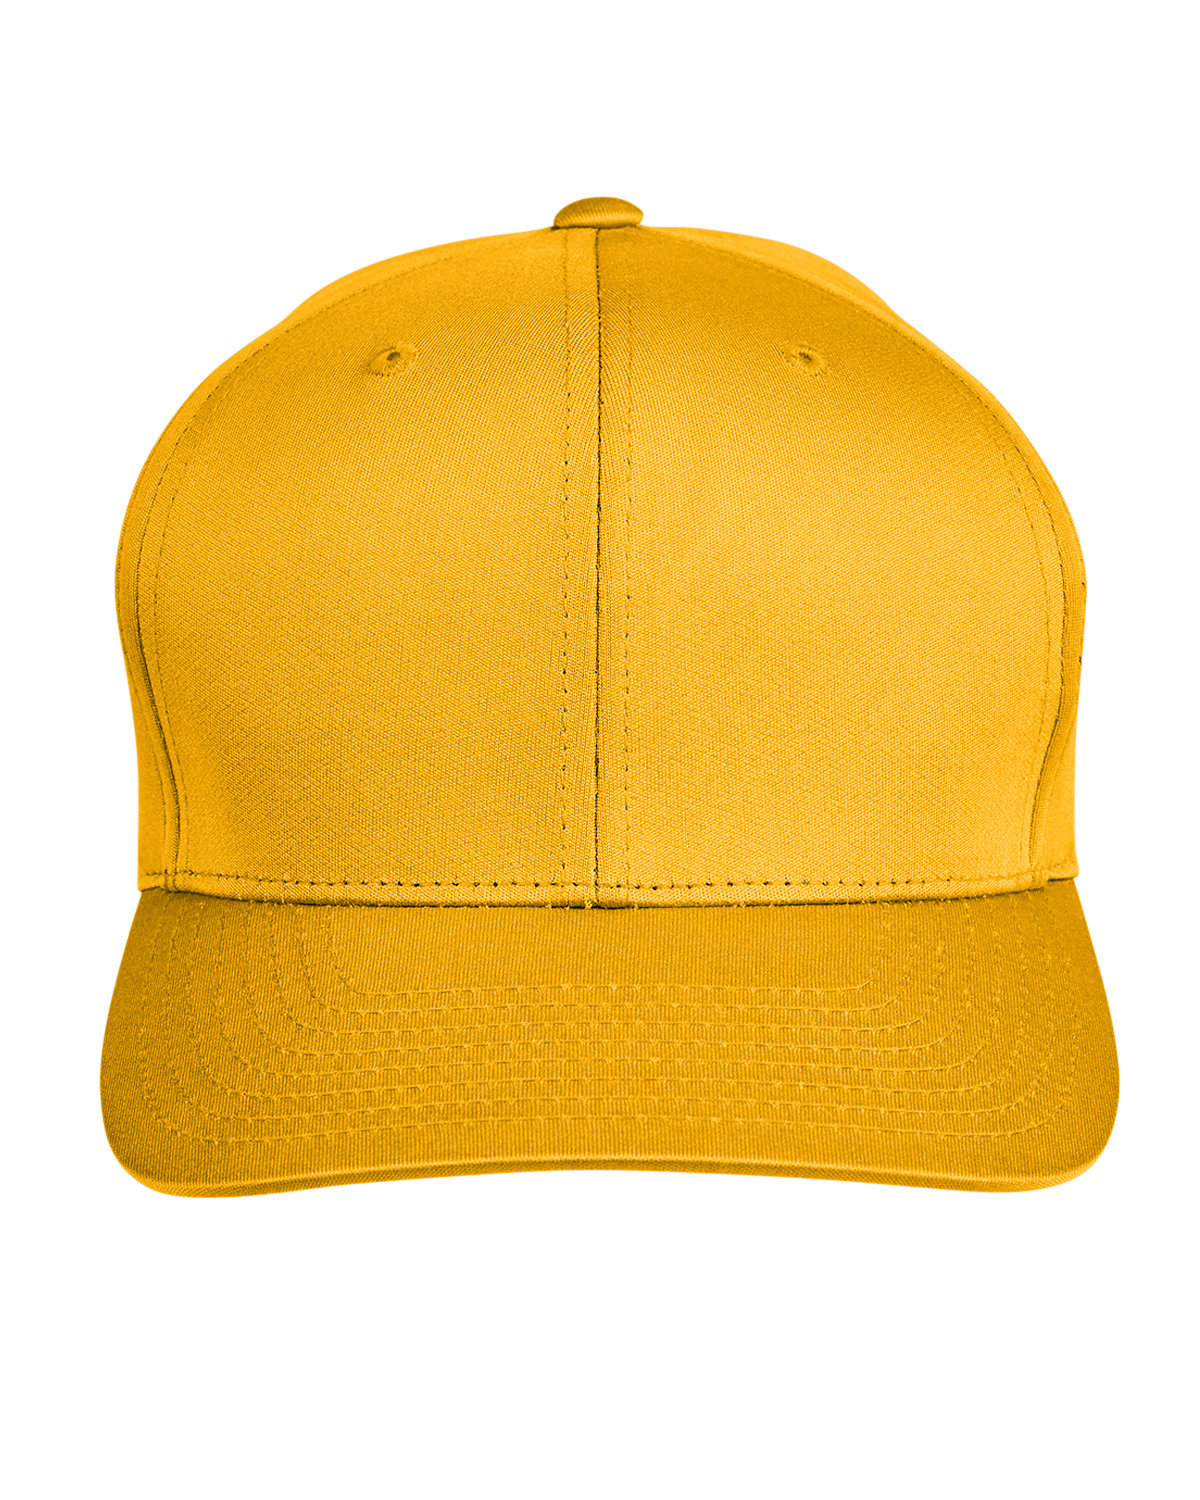 Team 365 by Yupoong® Adult Zone Performance Cap SPORT ATH GOLD 